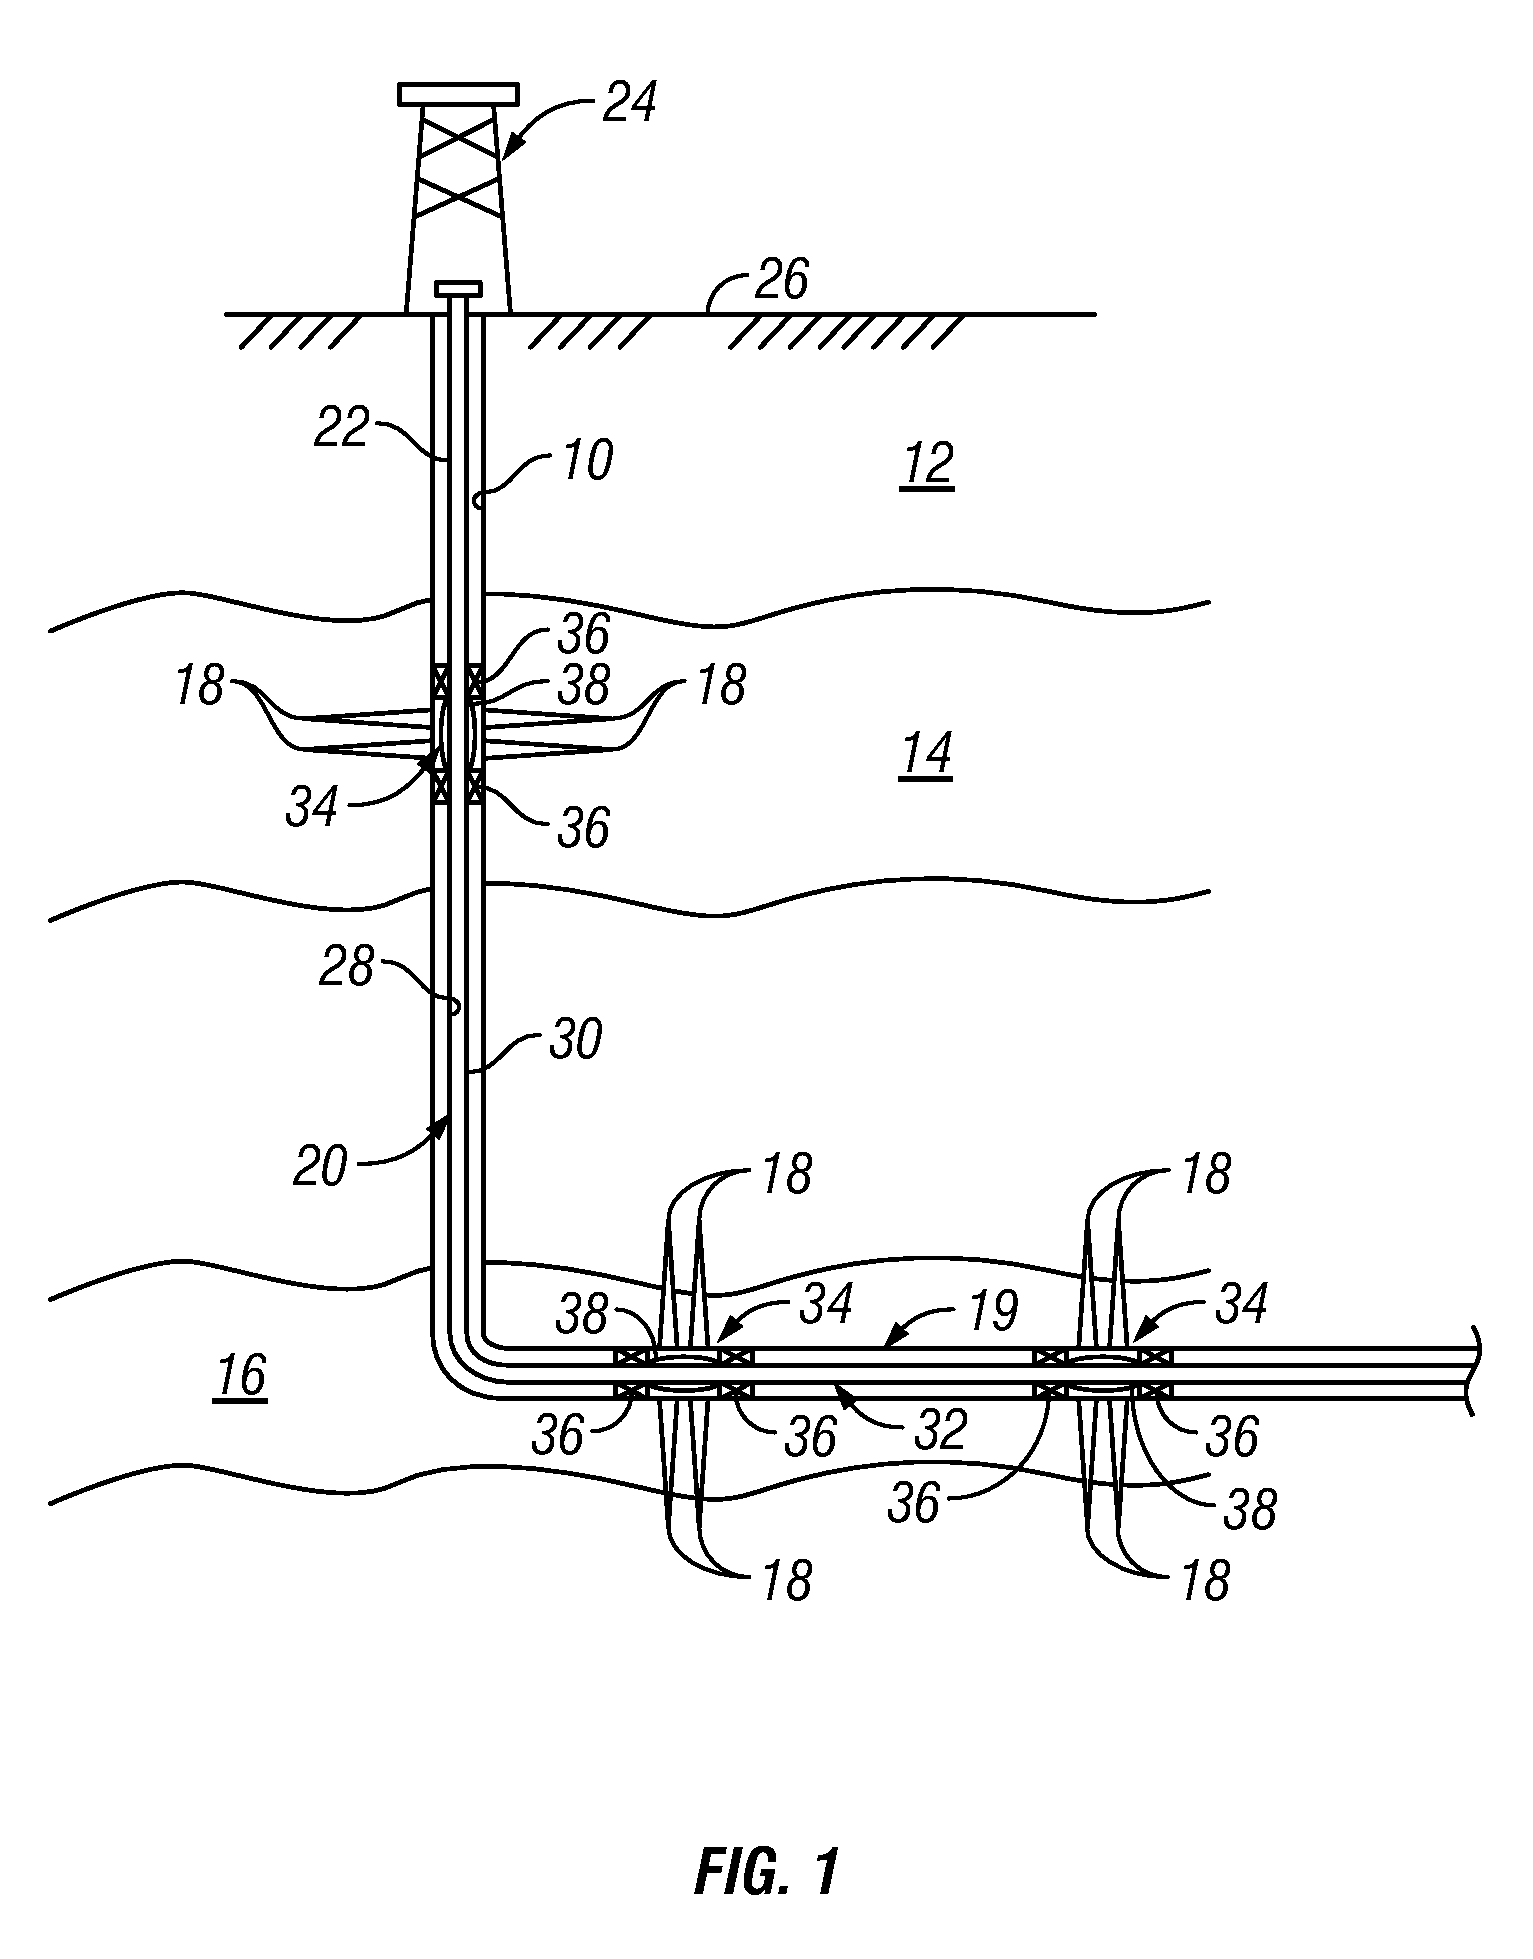 Water control device using electromagnetics